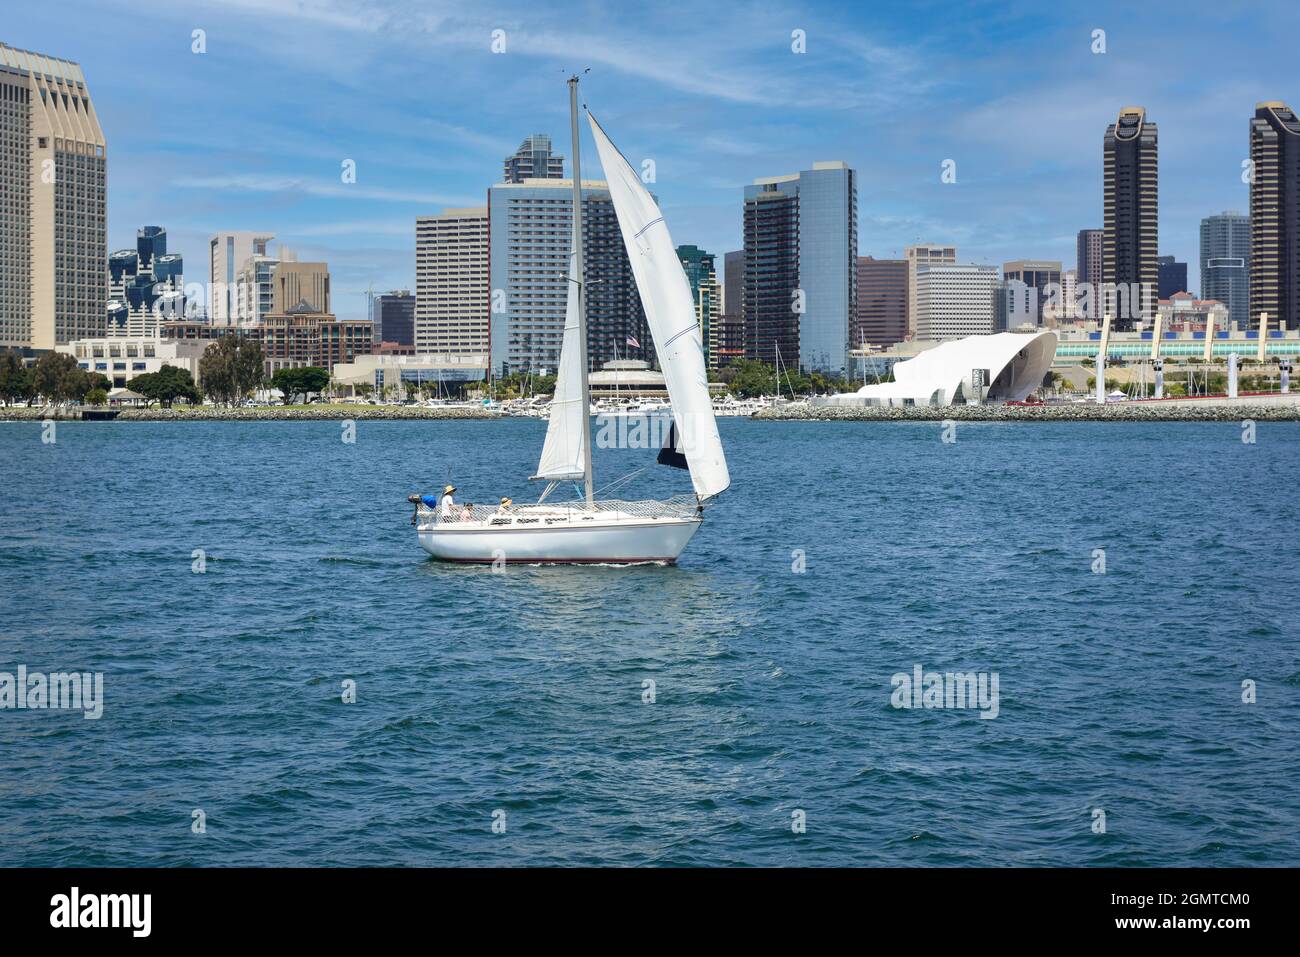 A sailboat glides across the San Diego bay before the waterfront marina district with the Hyatt and Marriott Hotels dominating the San Diego skyline Stock Photo